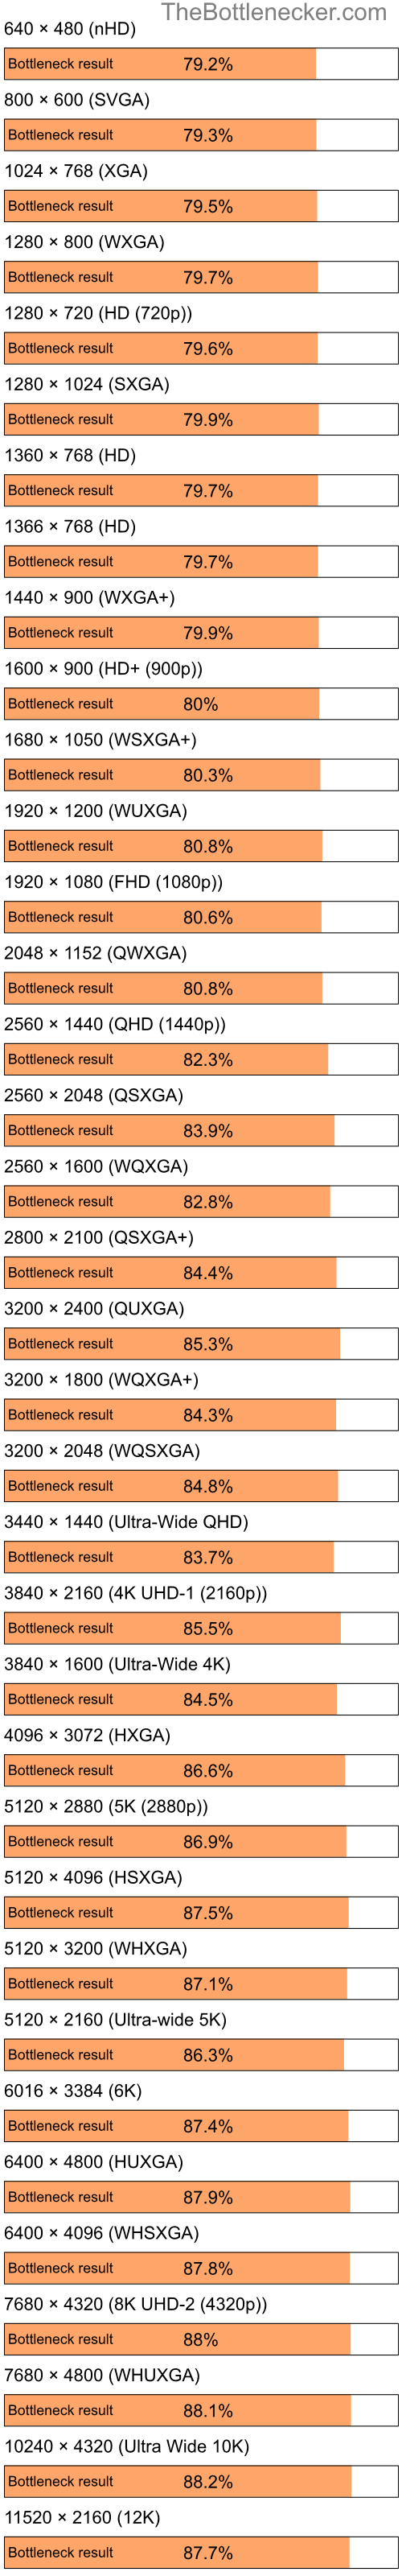 Bottleneck results by resolution for Intel Atom Z520 and AMD Radeon 9500 9700 in Graphic Card Intense Tasks